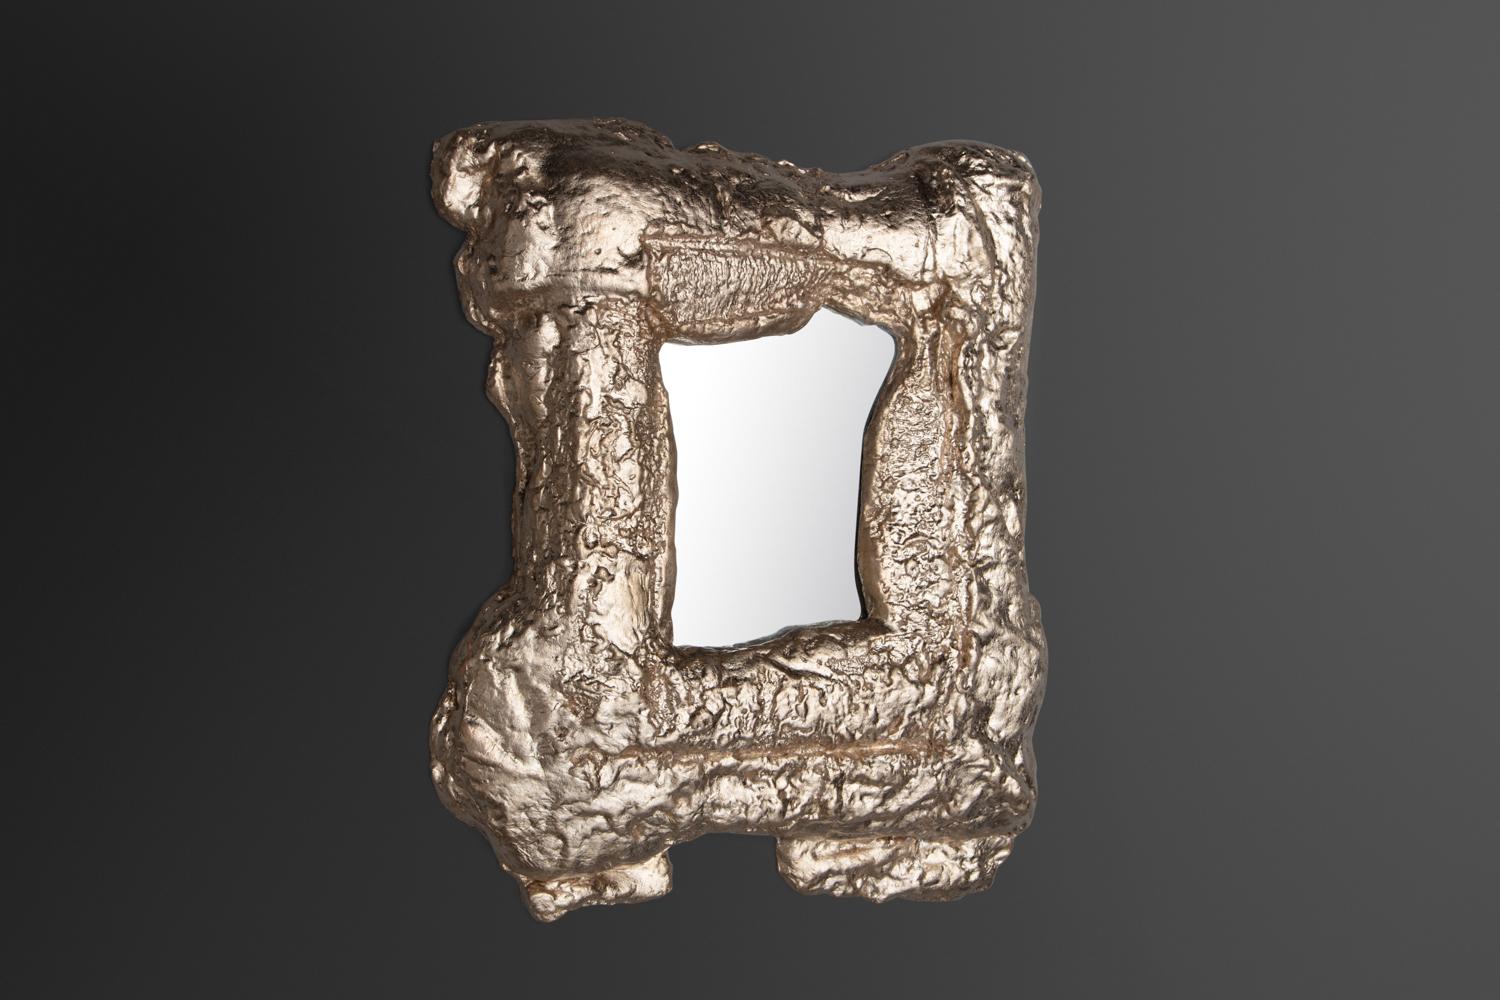 Yolande Milan Batteau (b. 1970).
USA, 2021.
Moon gold gilded cast plaster with a mirror plate.